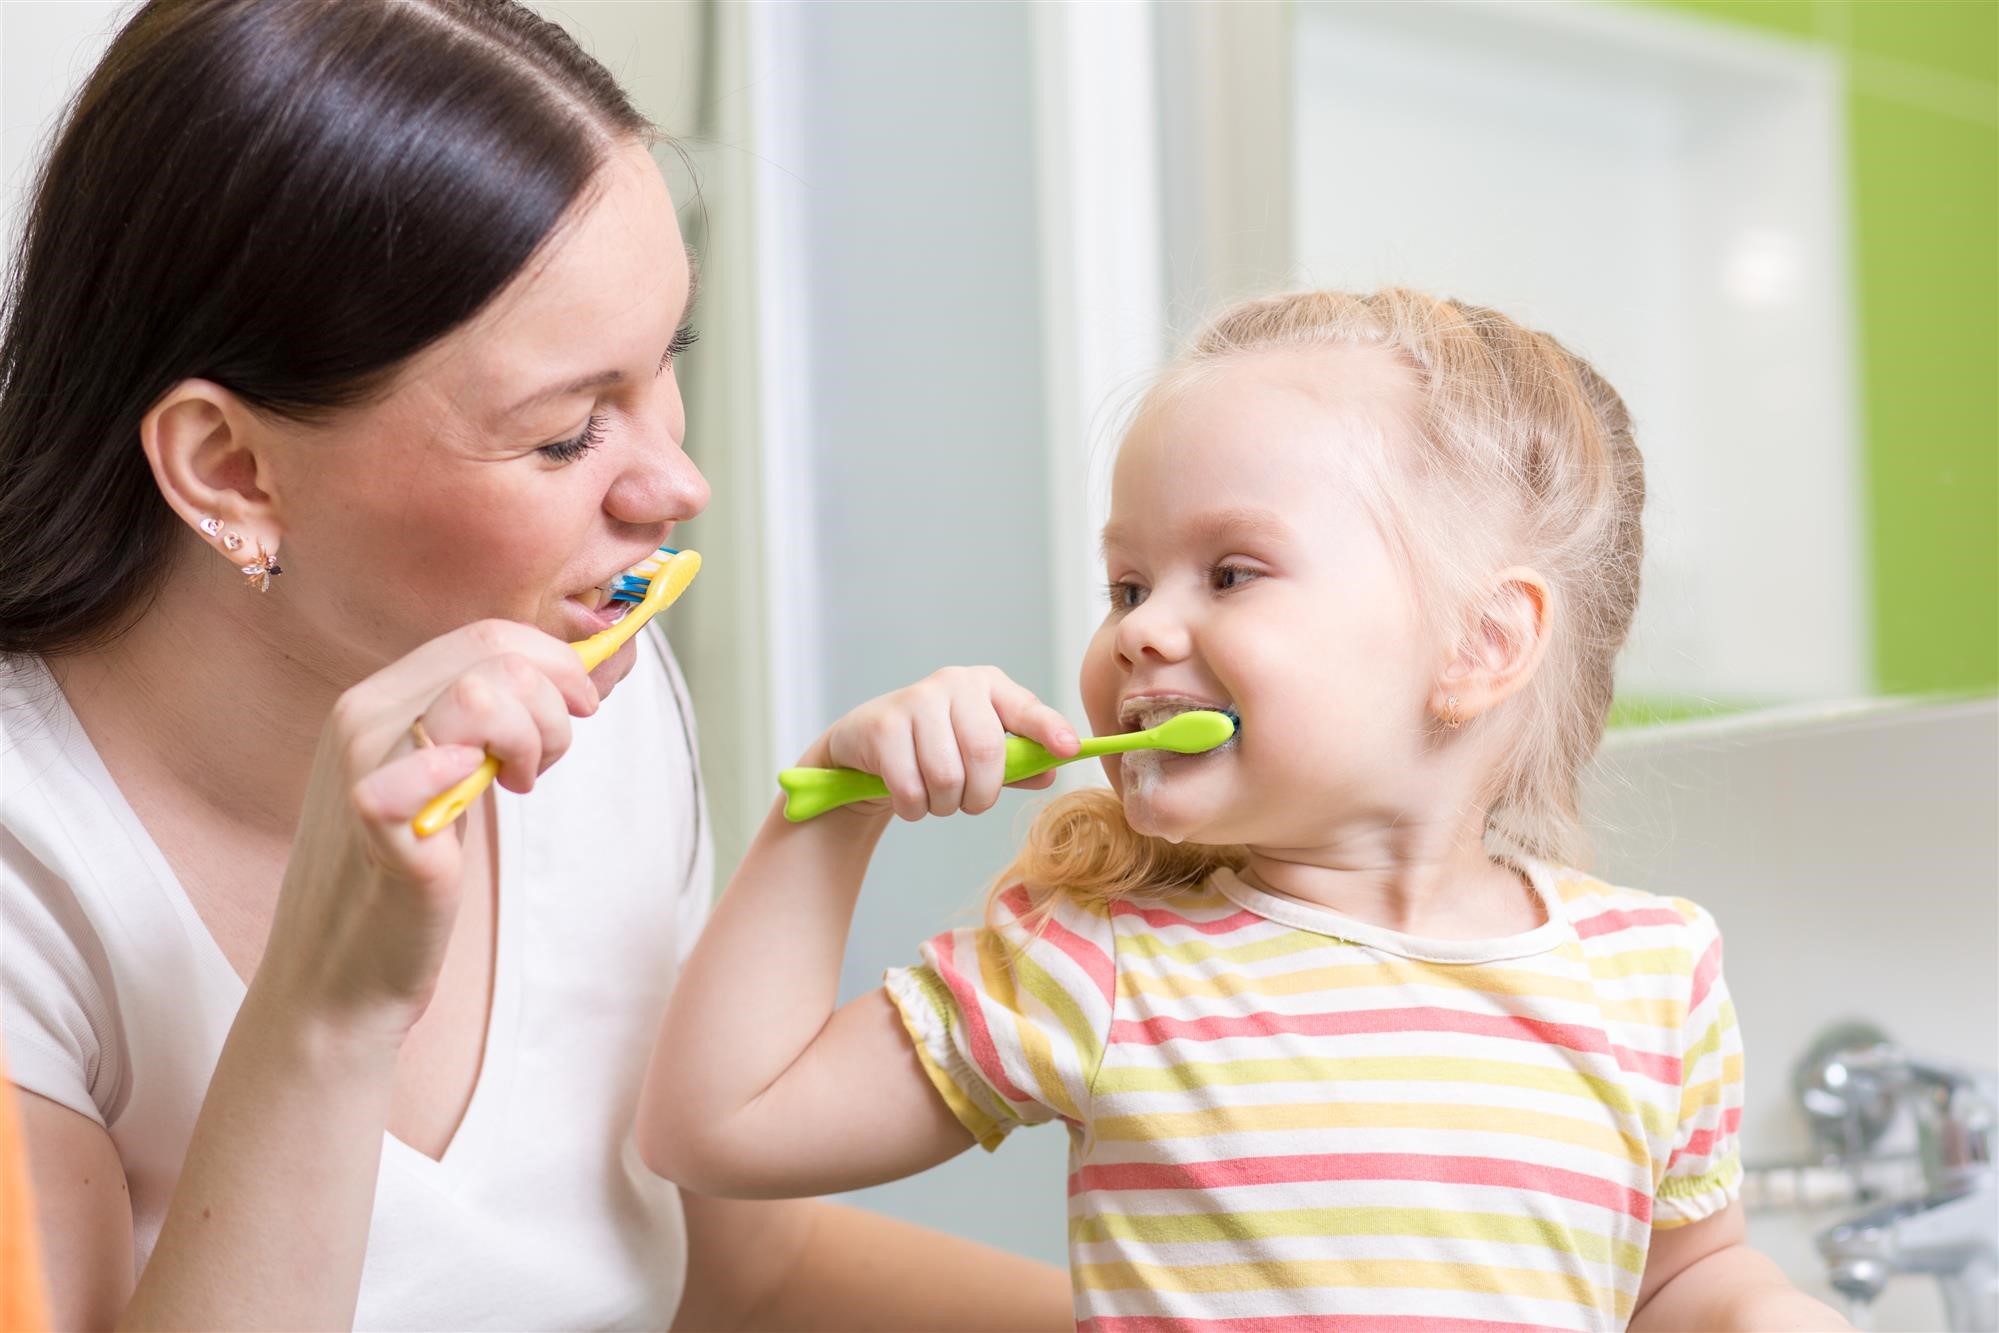 How Nannies Can Encourage Child Development